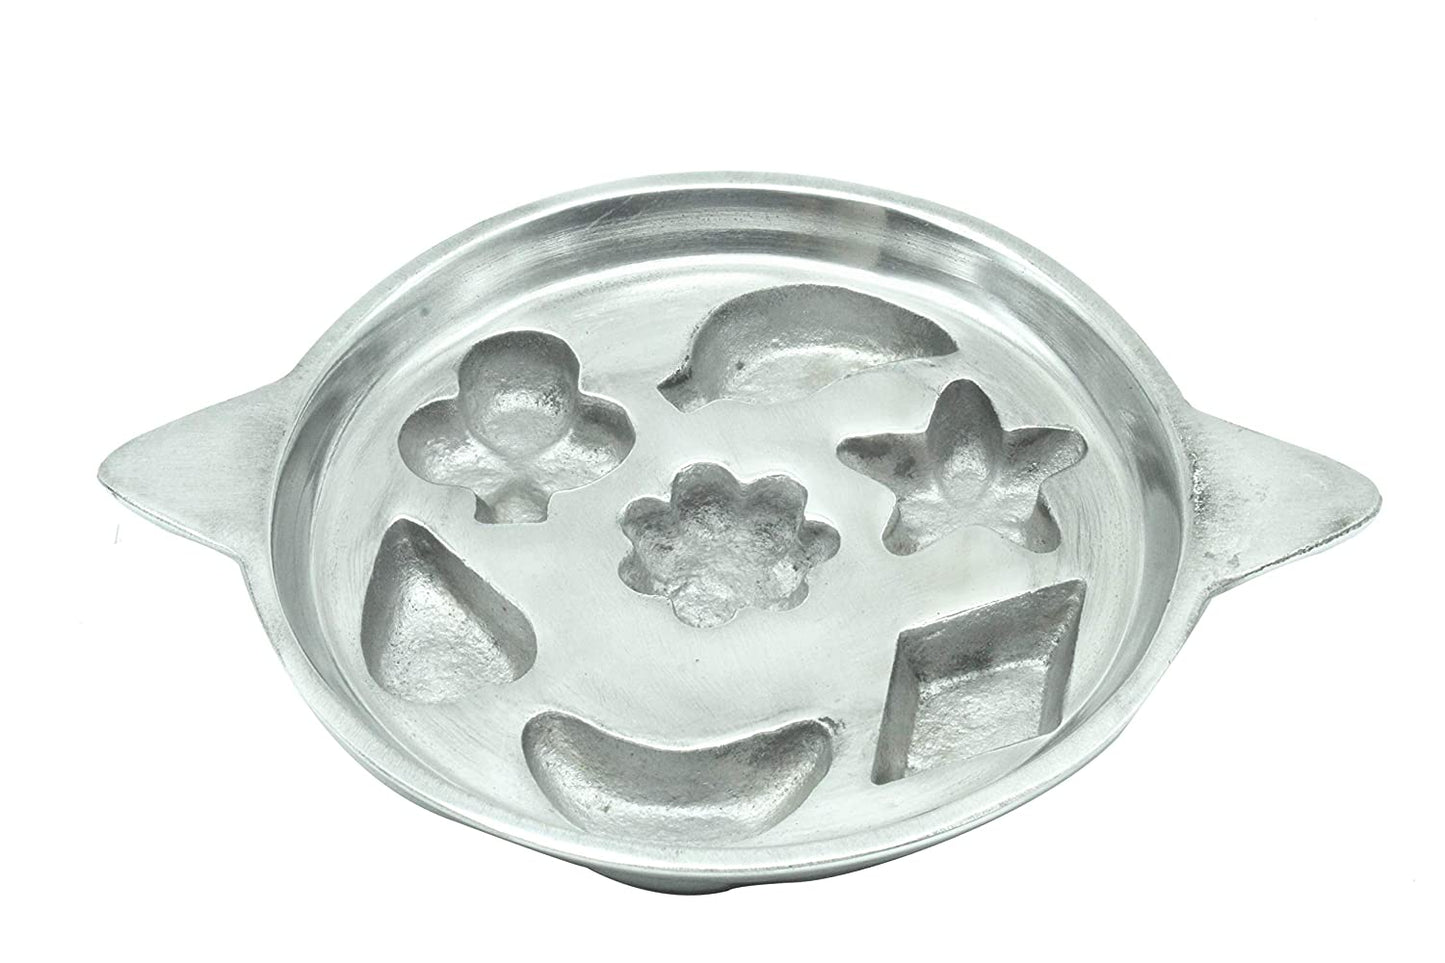 Aluminium 7 Slots Different Shapes Mini Cake | Muffins | Cake Mould Pan with Lid